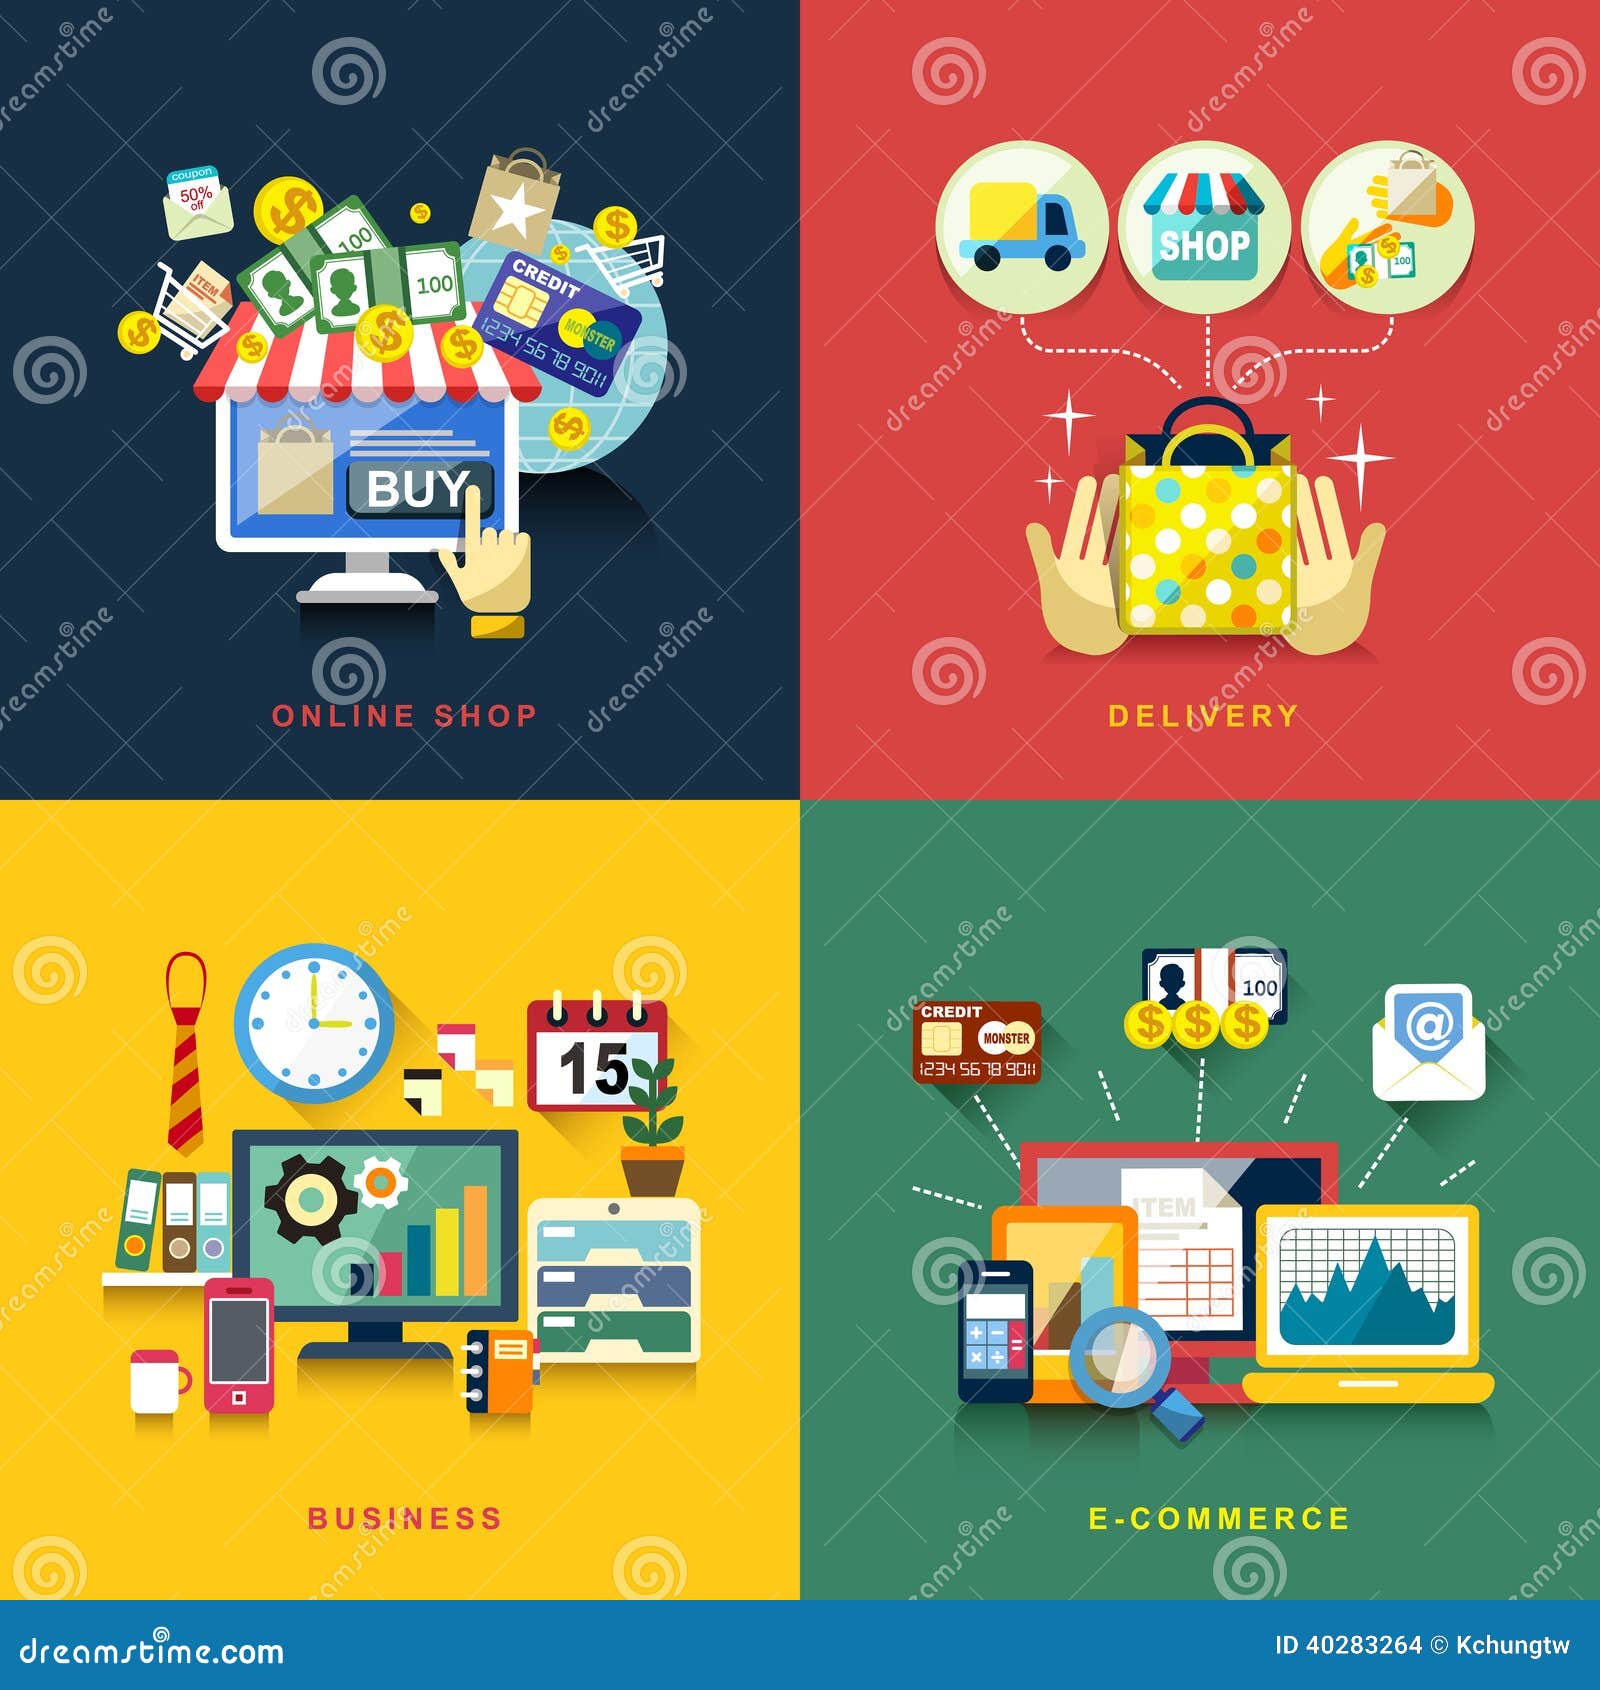 Flat design concept of e-commerce, delivery, online shopping, business ...